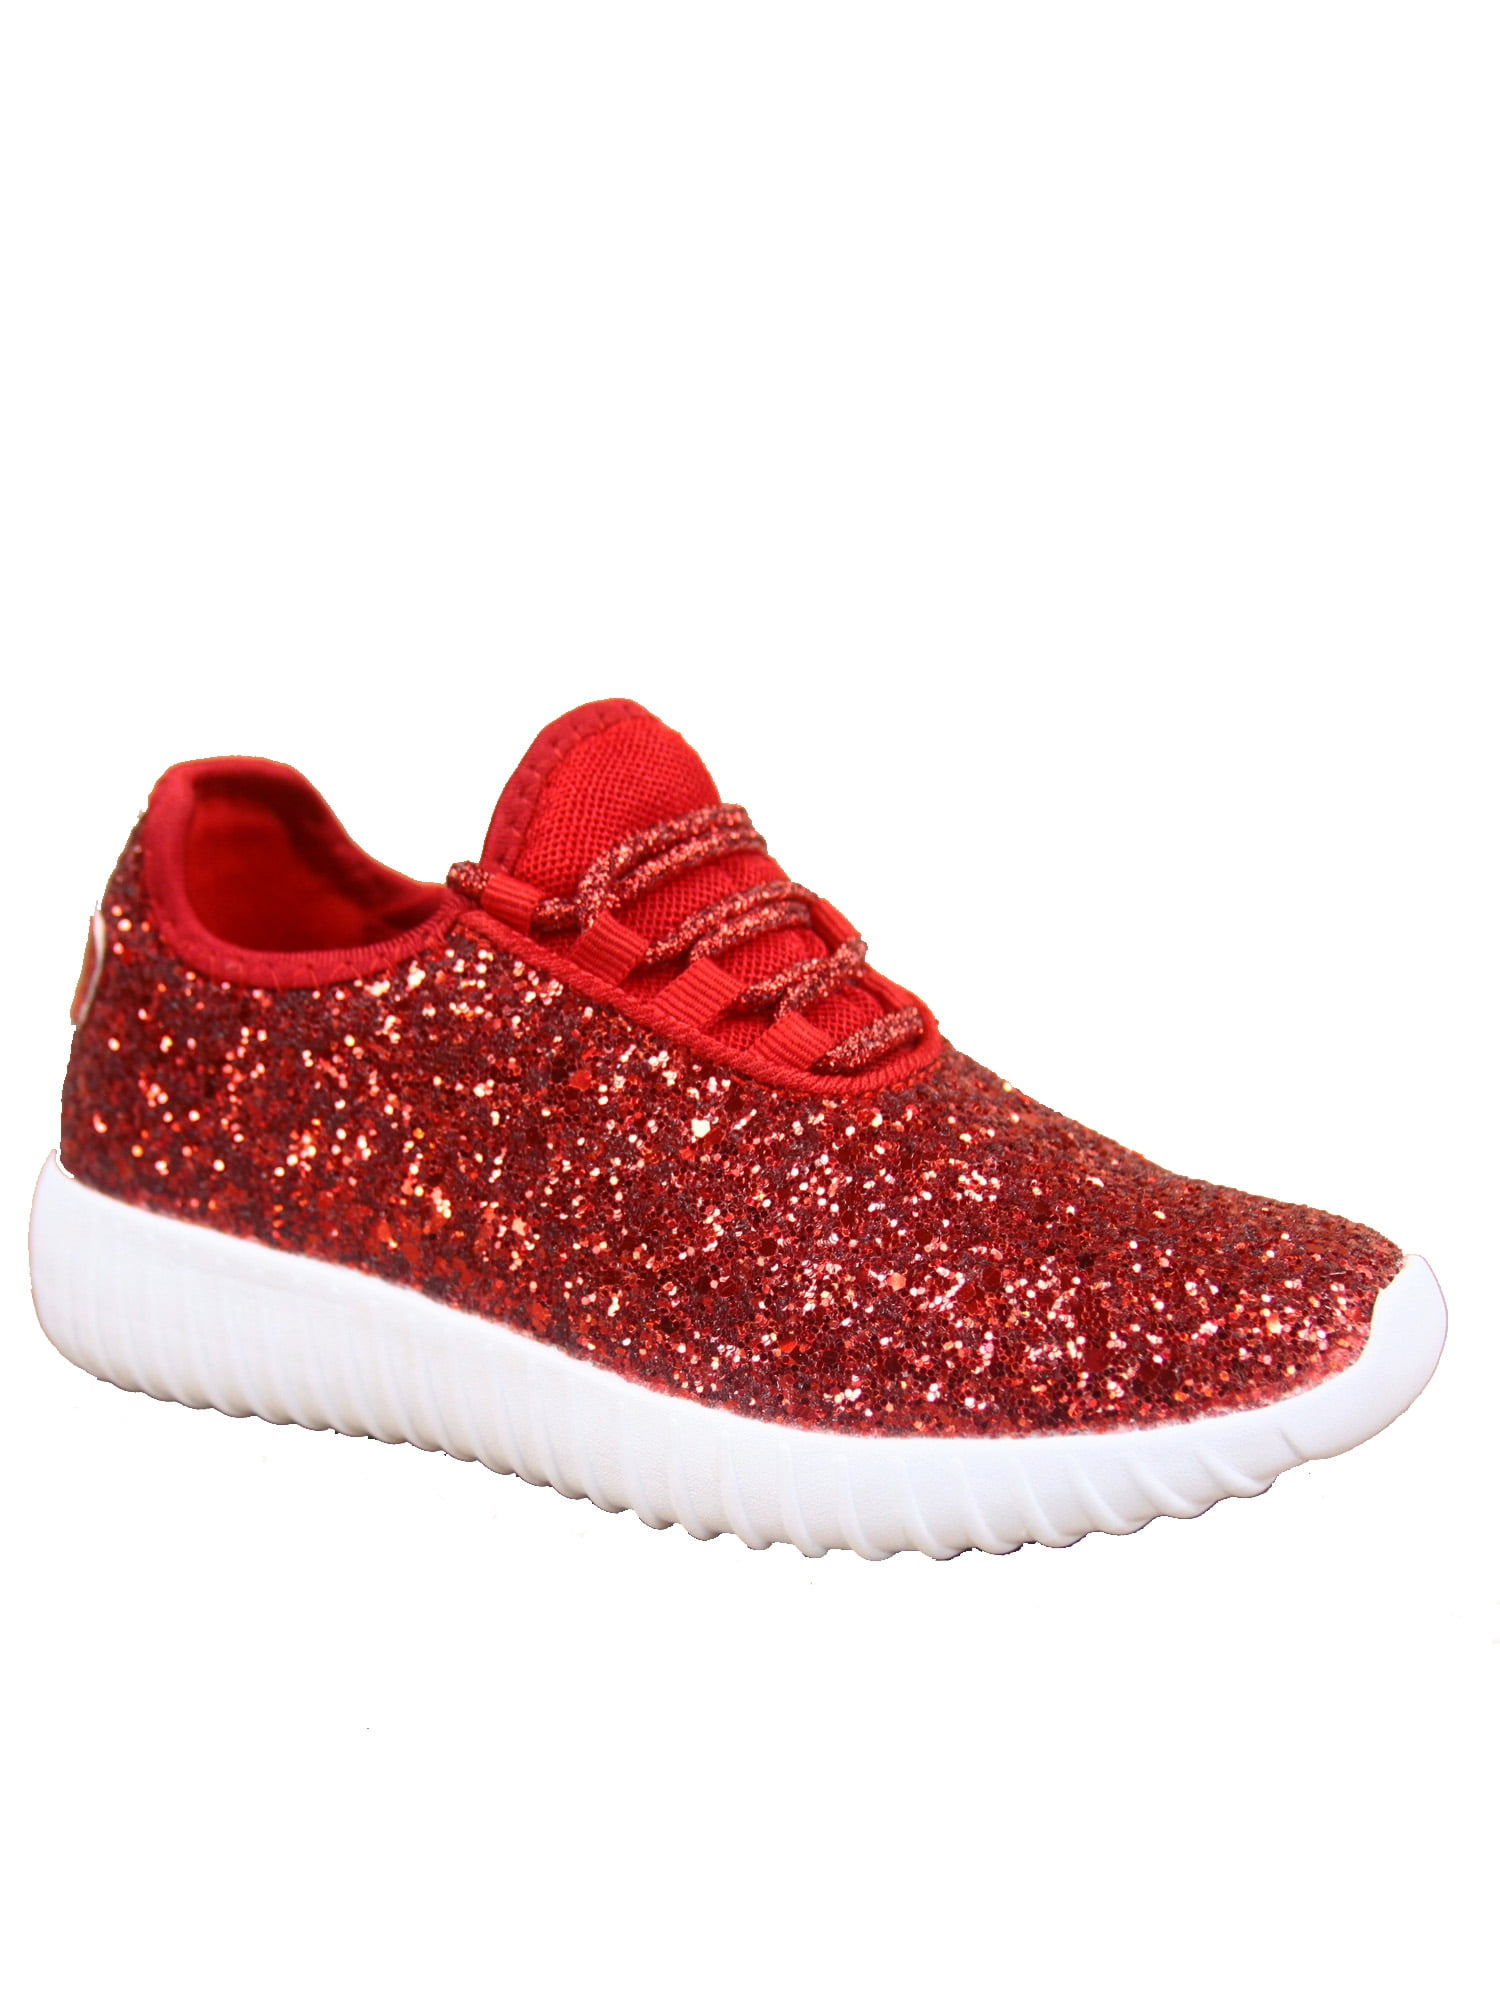 sparkly red tennis shoes